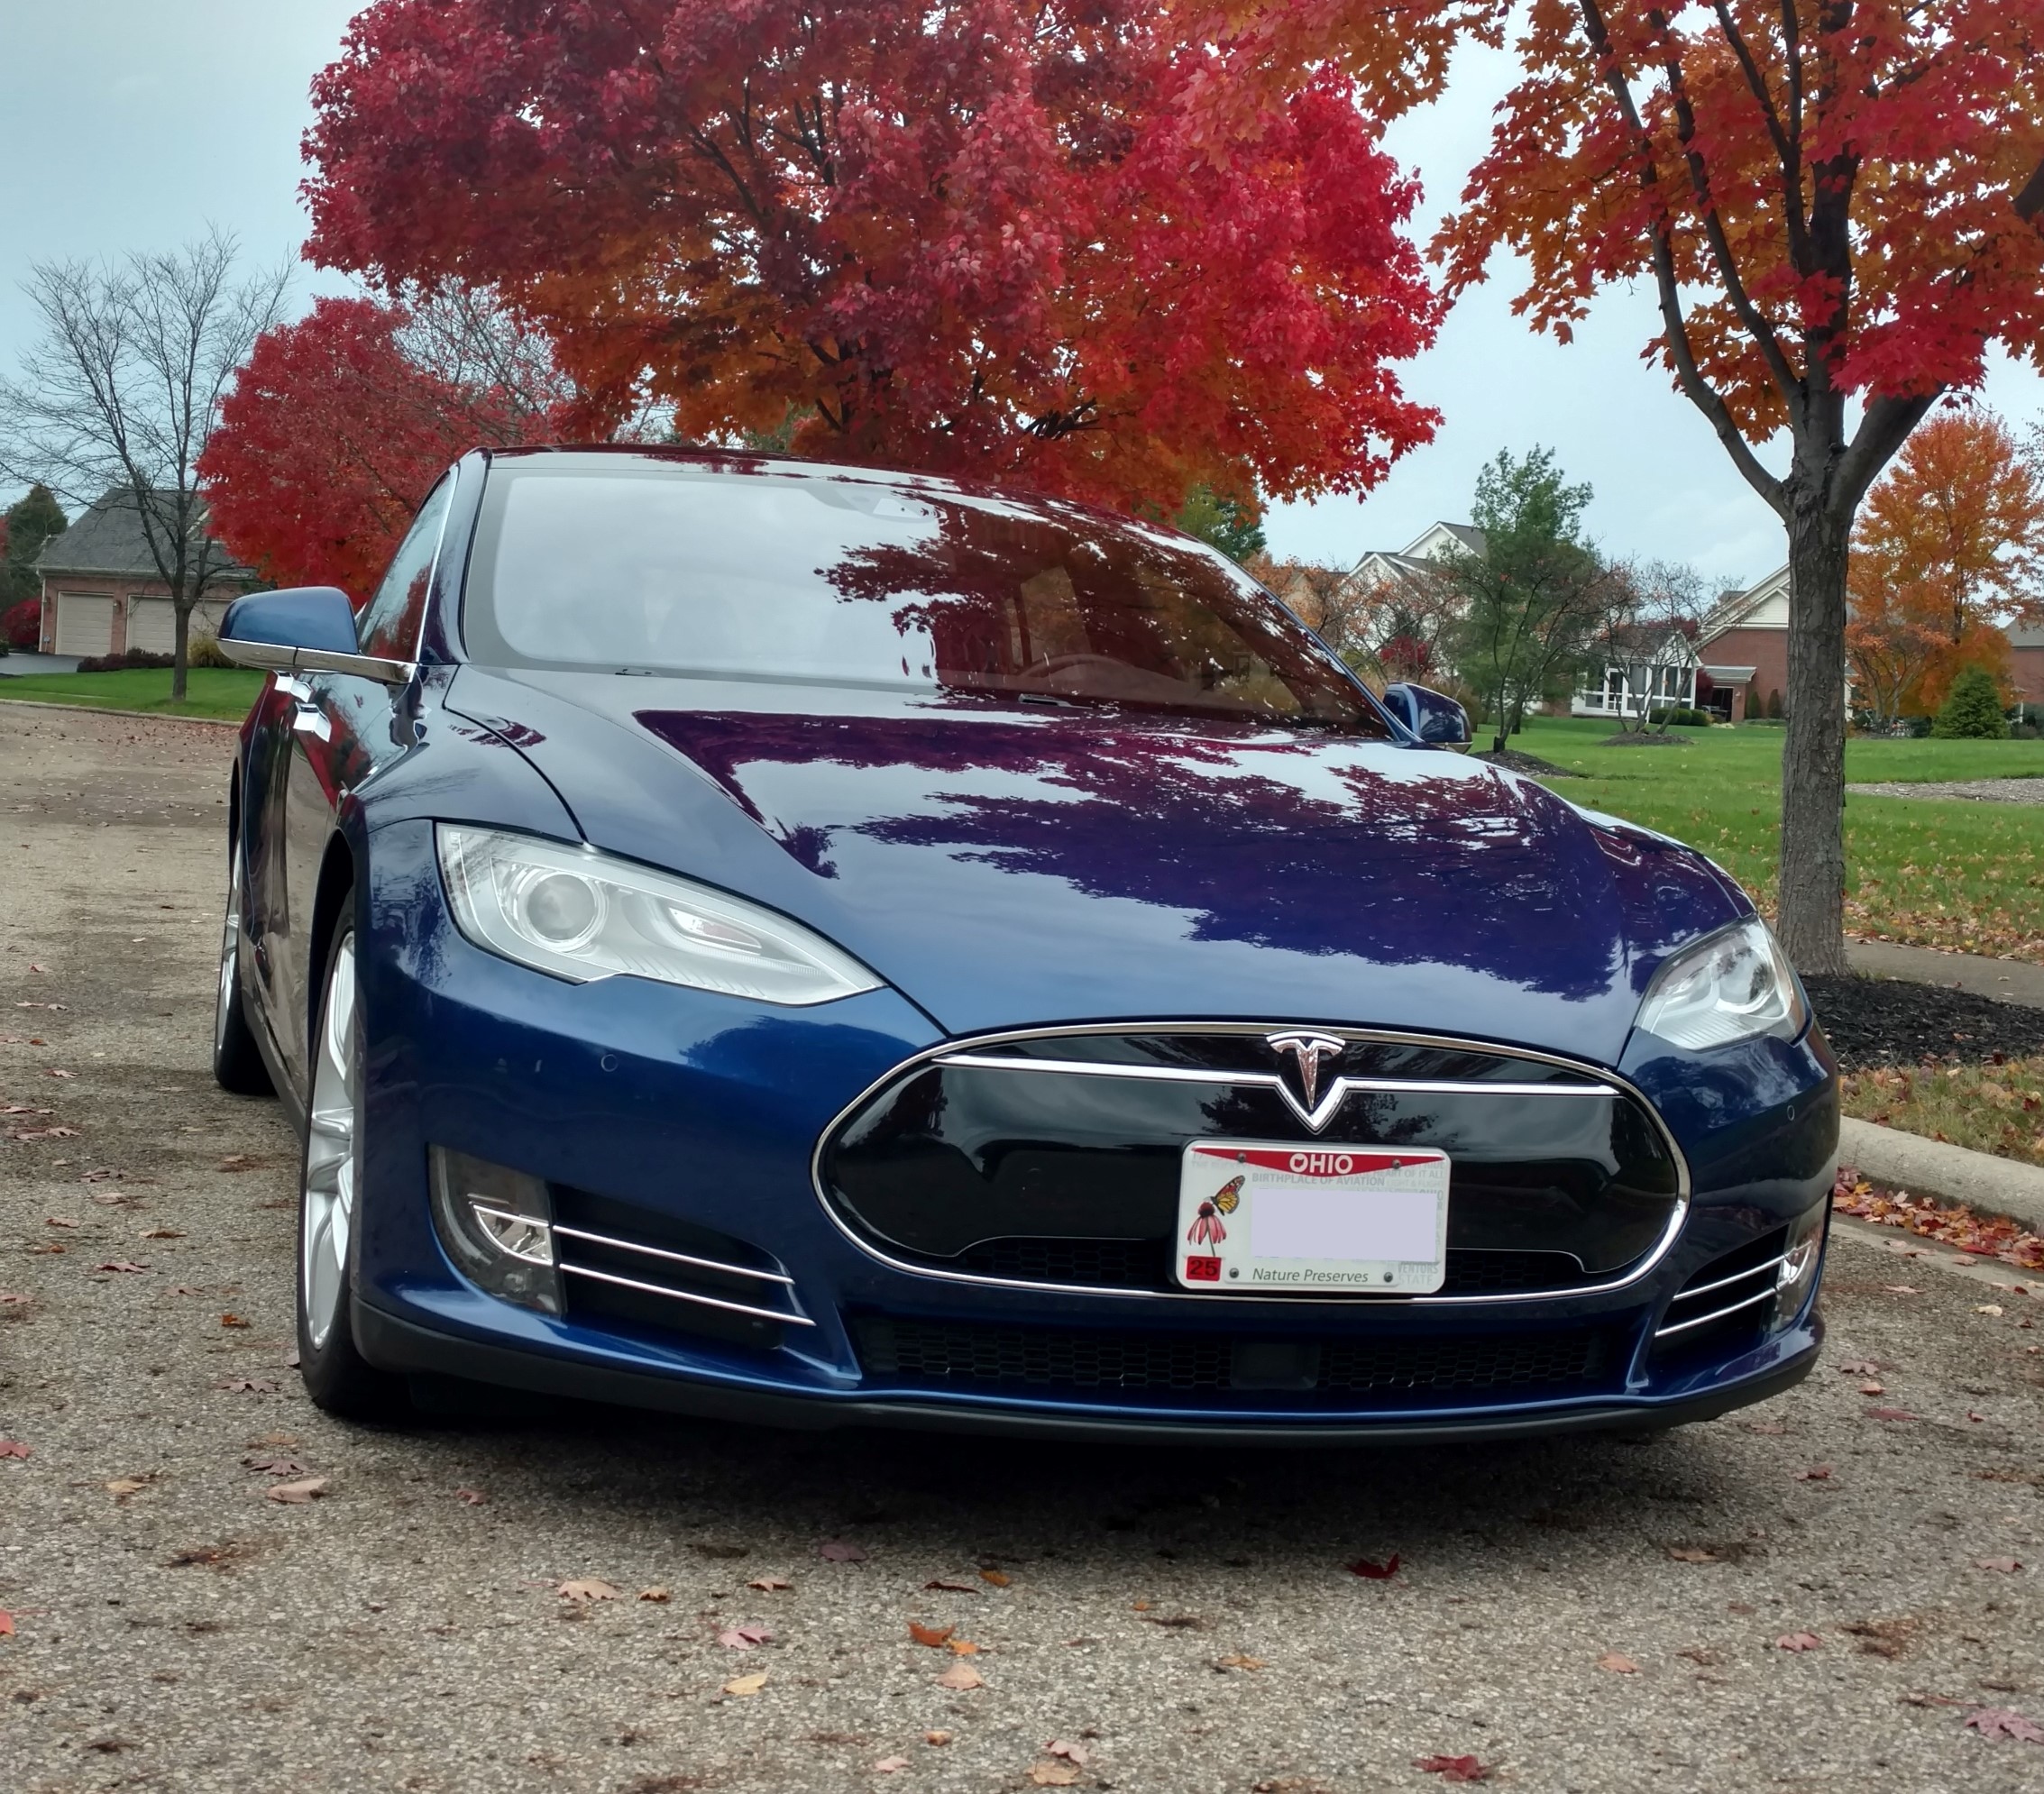 Tesla Model S 2015 electric car owner review (USA)